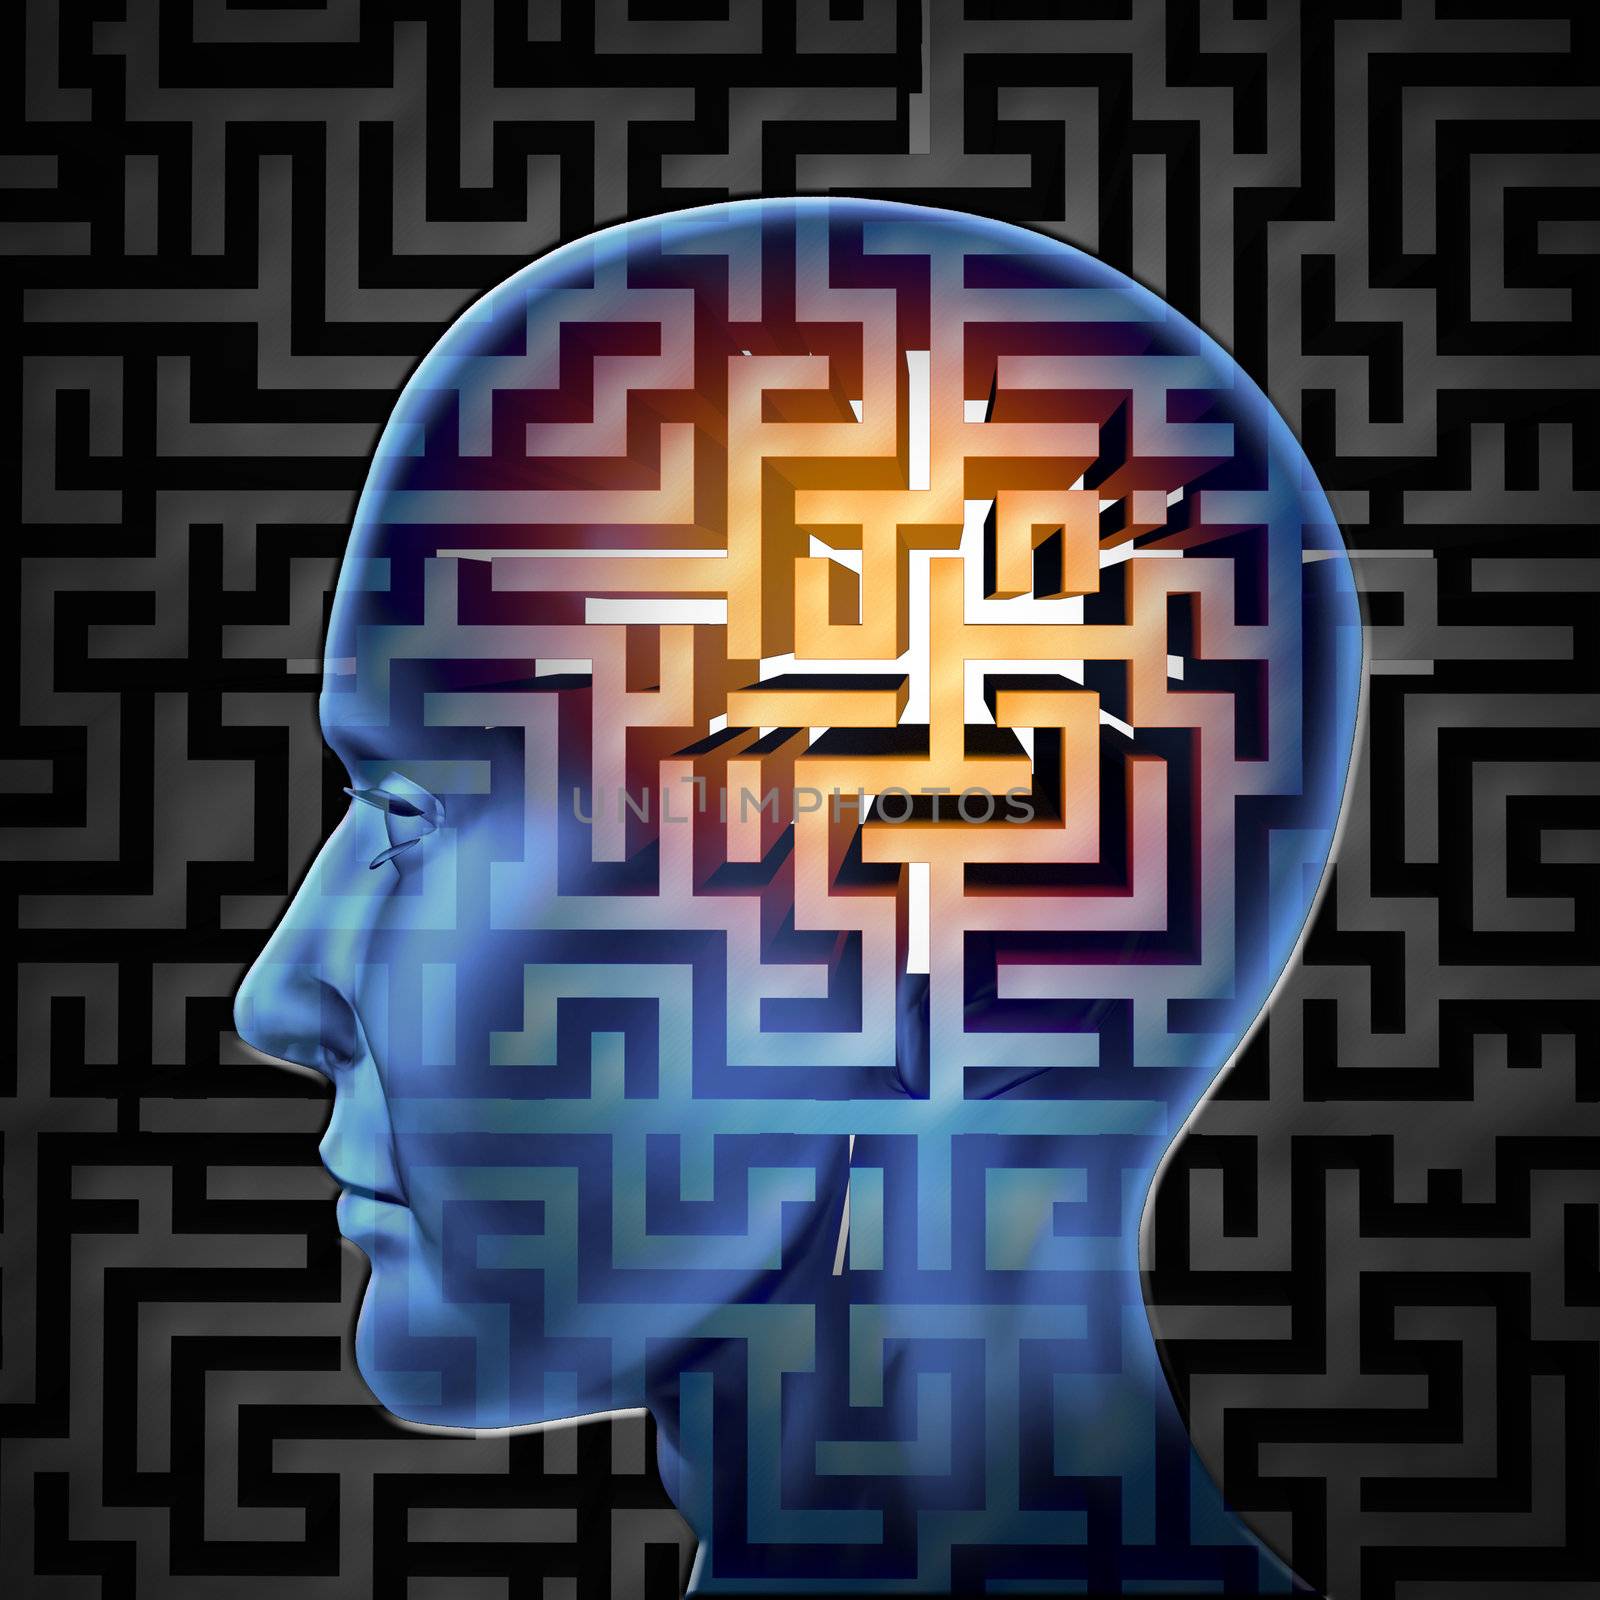 Brain search and human intelligence in regards to research in finding solutions through creative paths and overcoming challenges and obstacles to mental health issues with a glowing maze or labyrinth on a head.